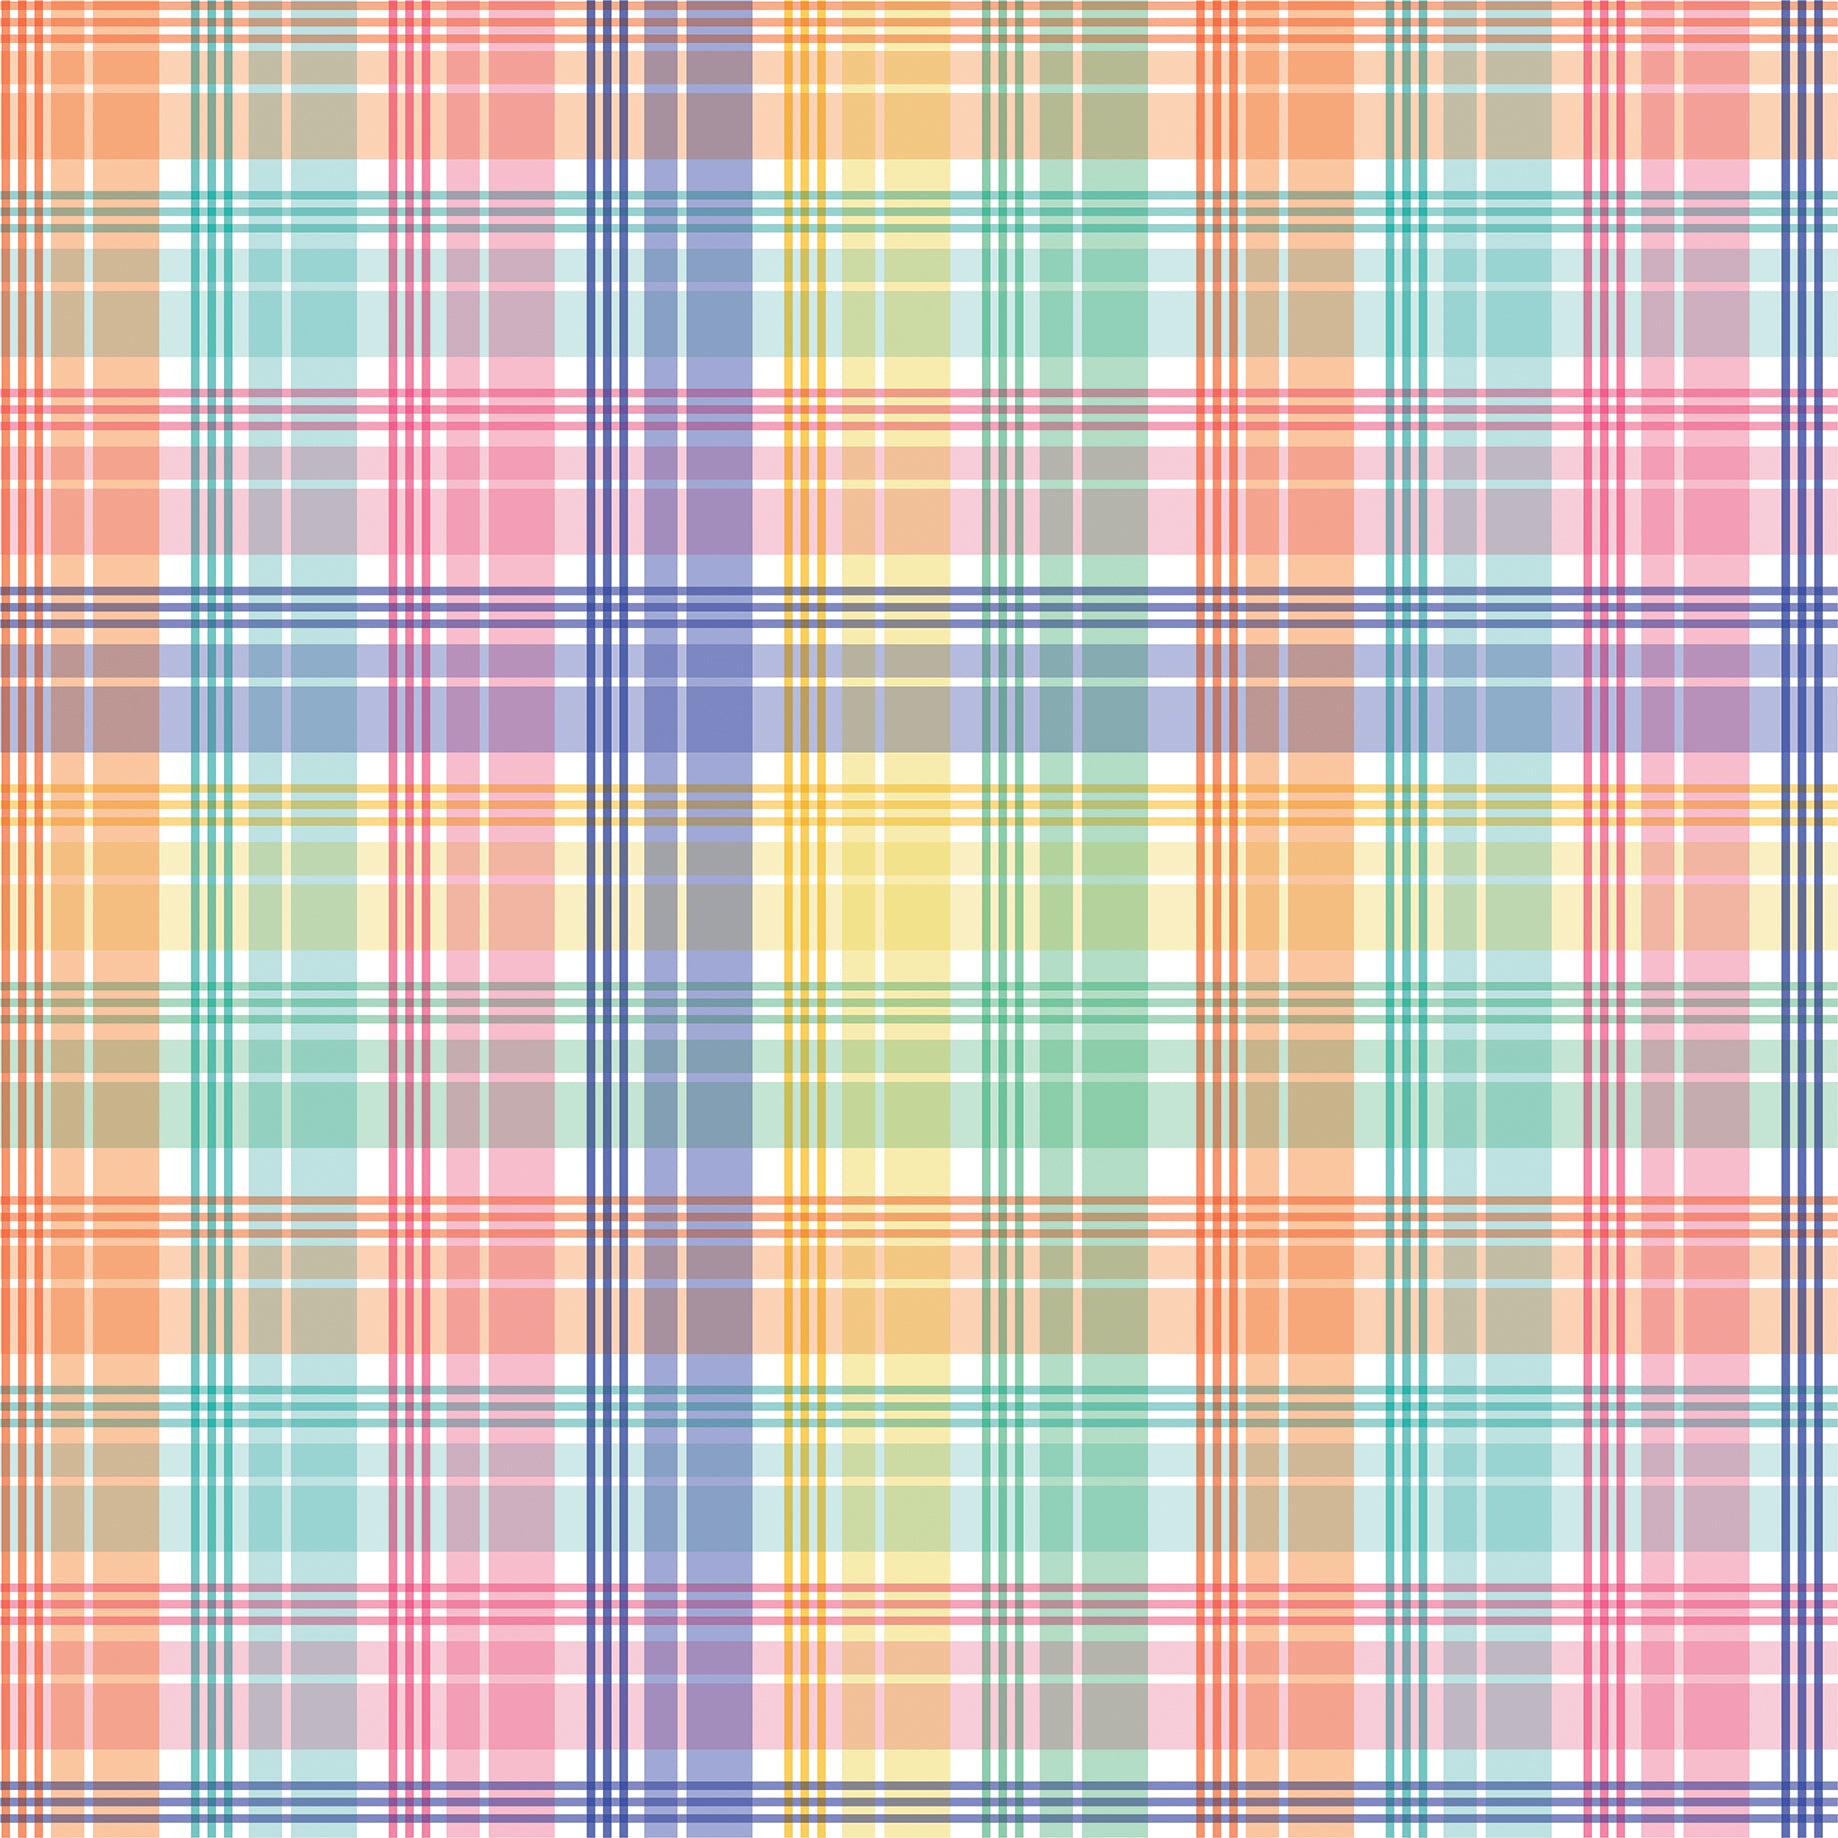 My Little Girl Collection Pretty Girl Plaid 12 x 12 Double-Sided Scrapbook Paper by Echo Park Paper